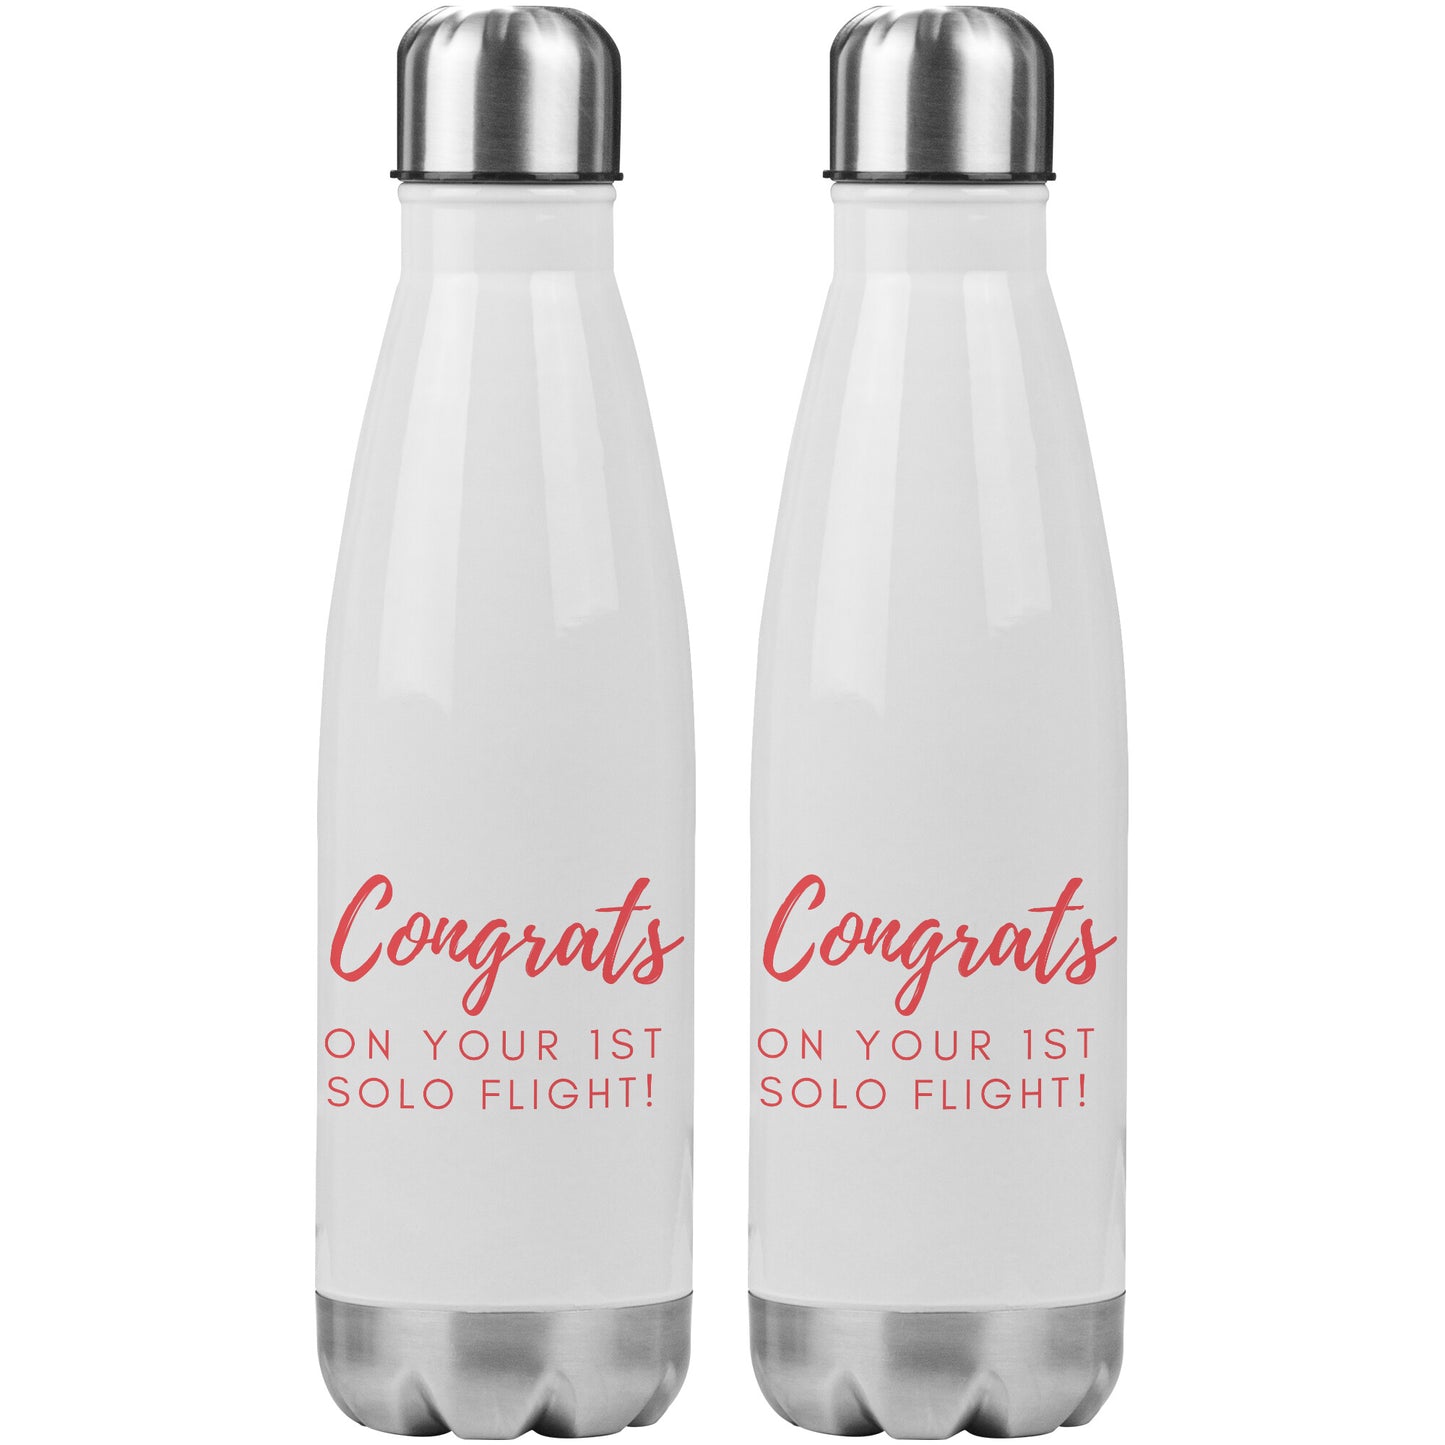 Congrats on your first solo flight! - stainless steel water bottle with red text